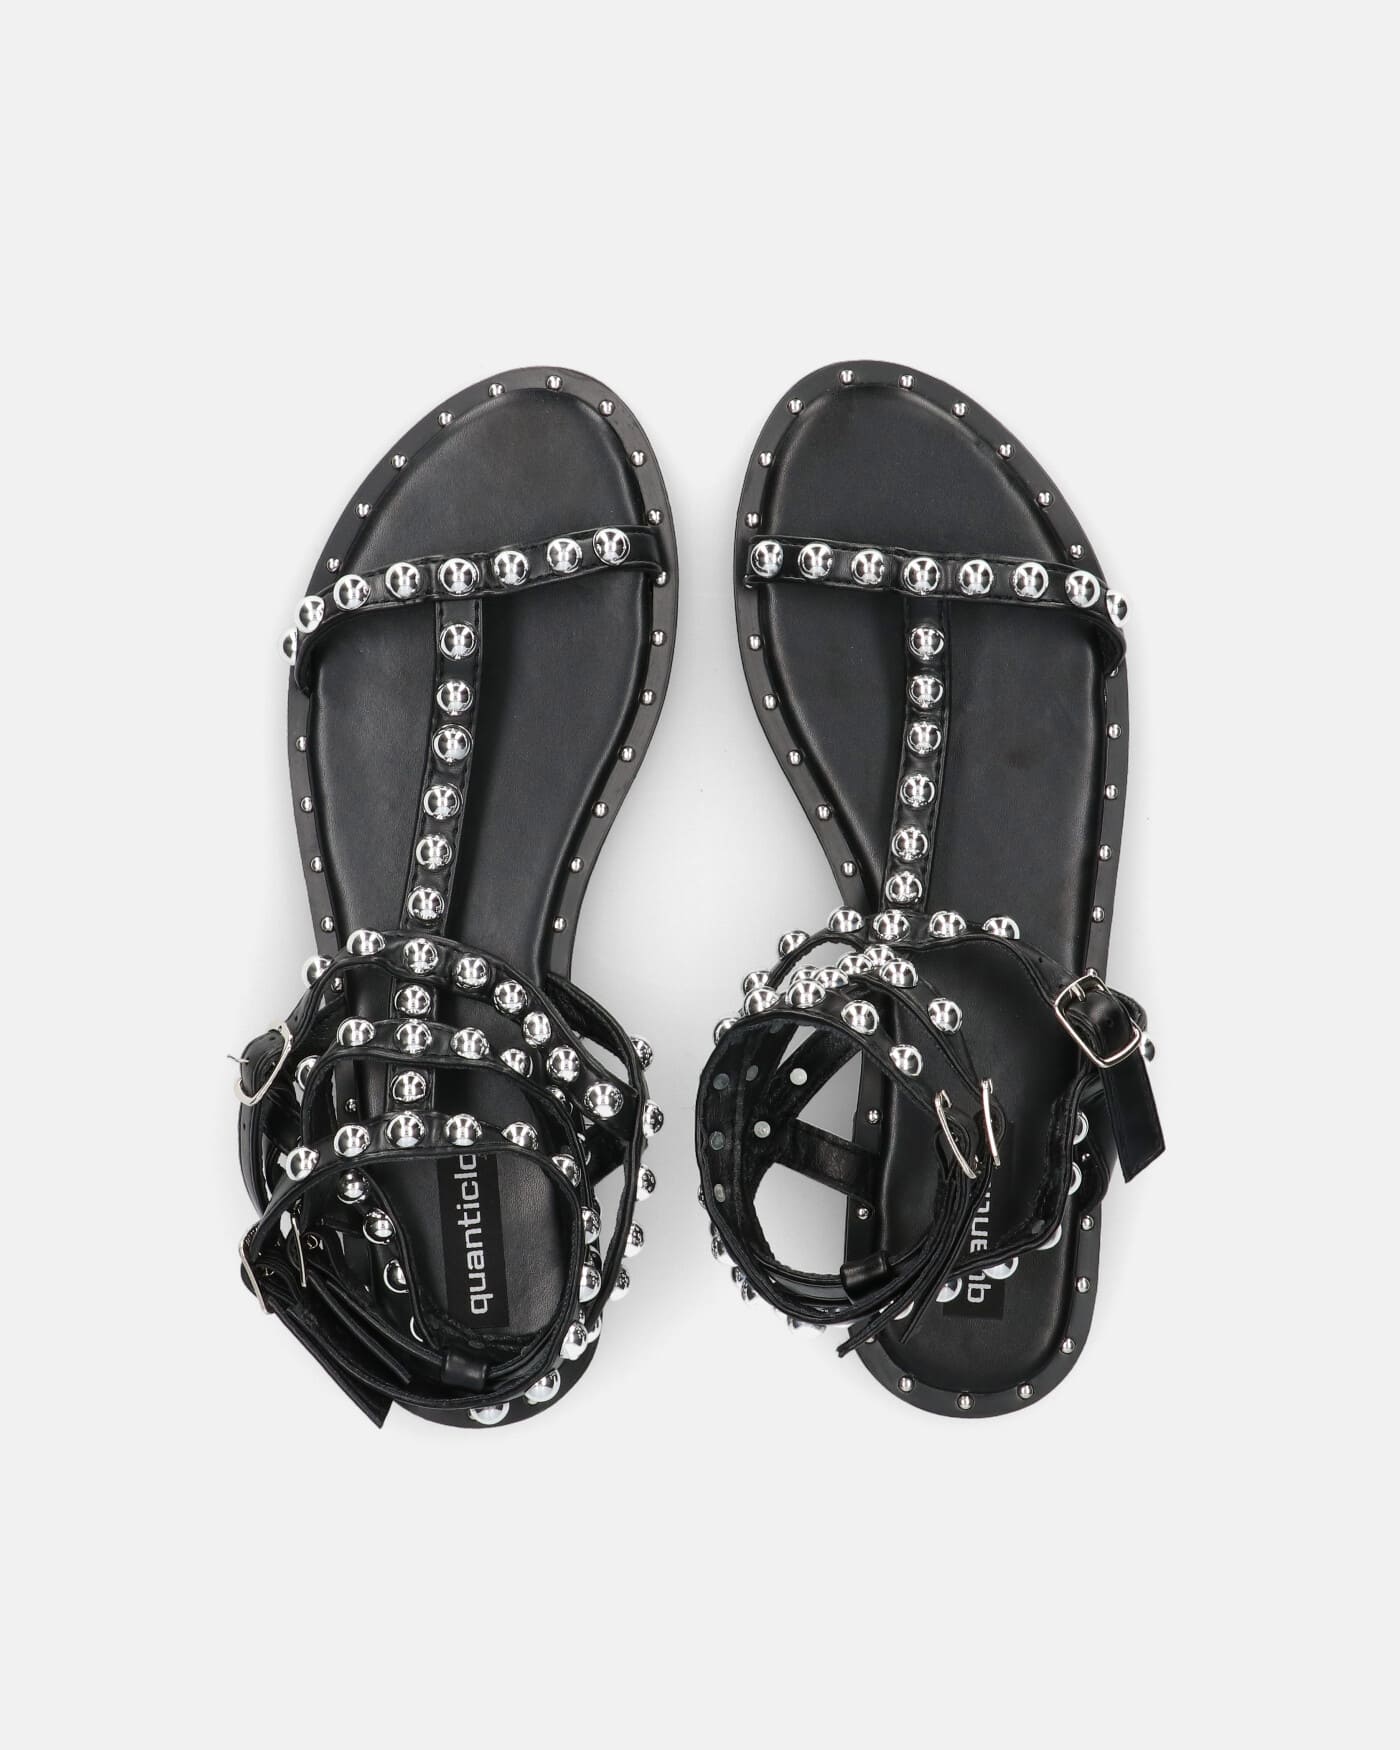 RILEY - black sandals with metal studs and straps